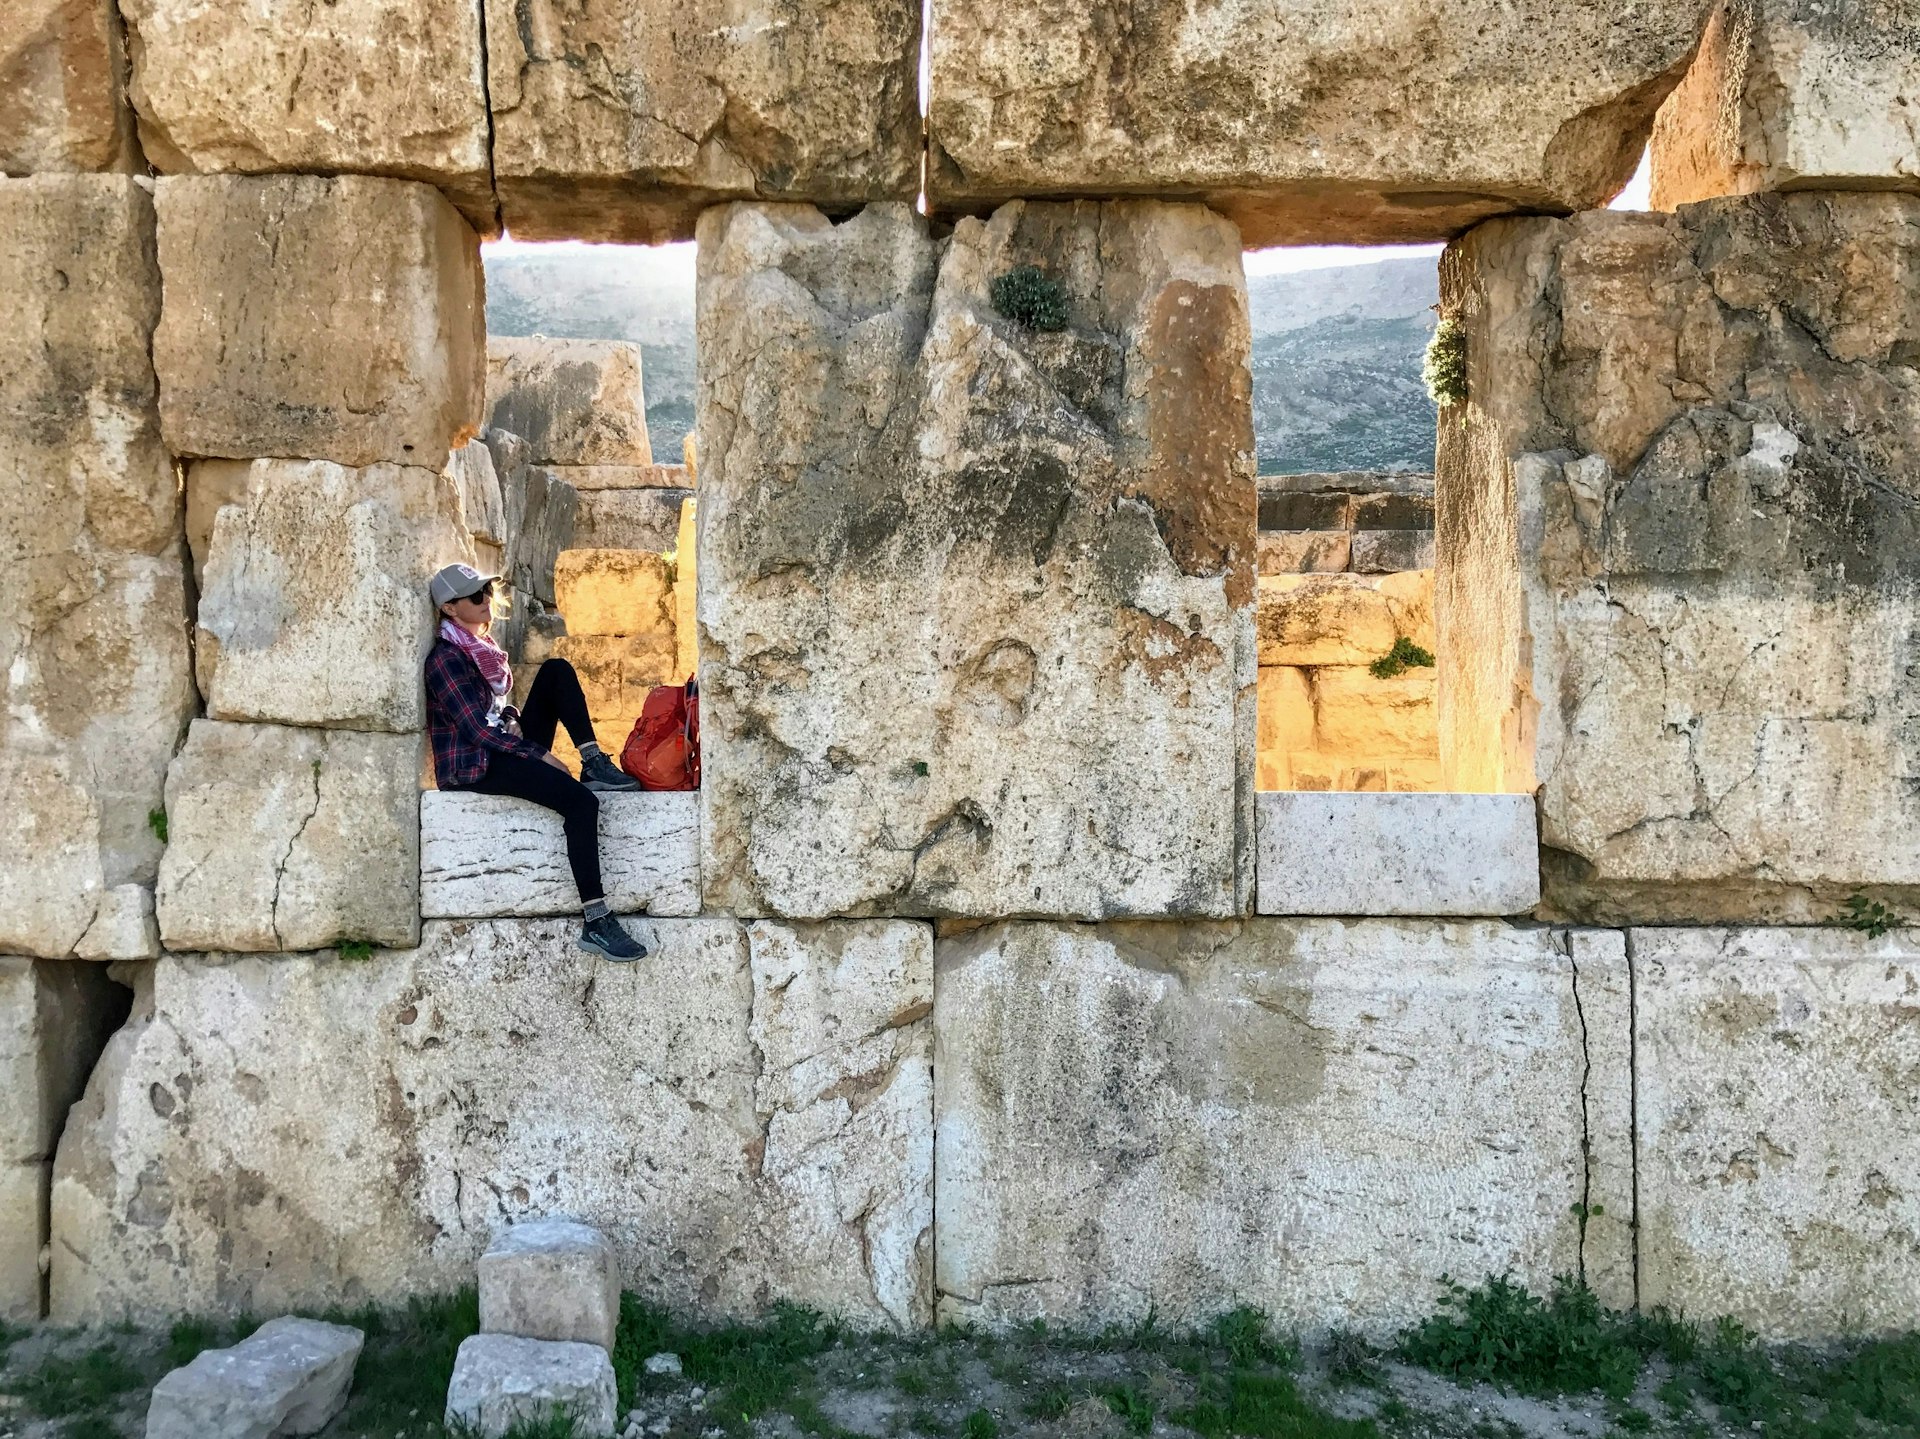 A woman sits in one of two huge open window spaces in an ancient ruin; the blocks that make up the wall are massive, each dwarfing the woman.